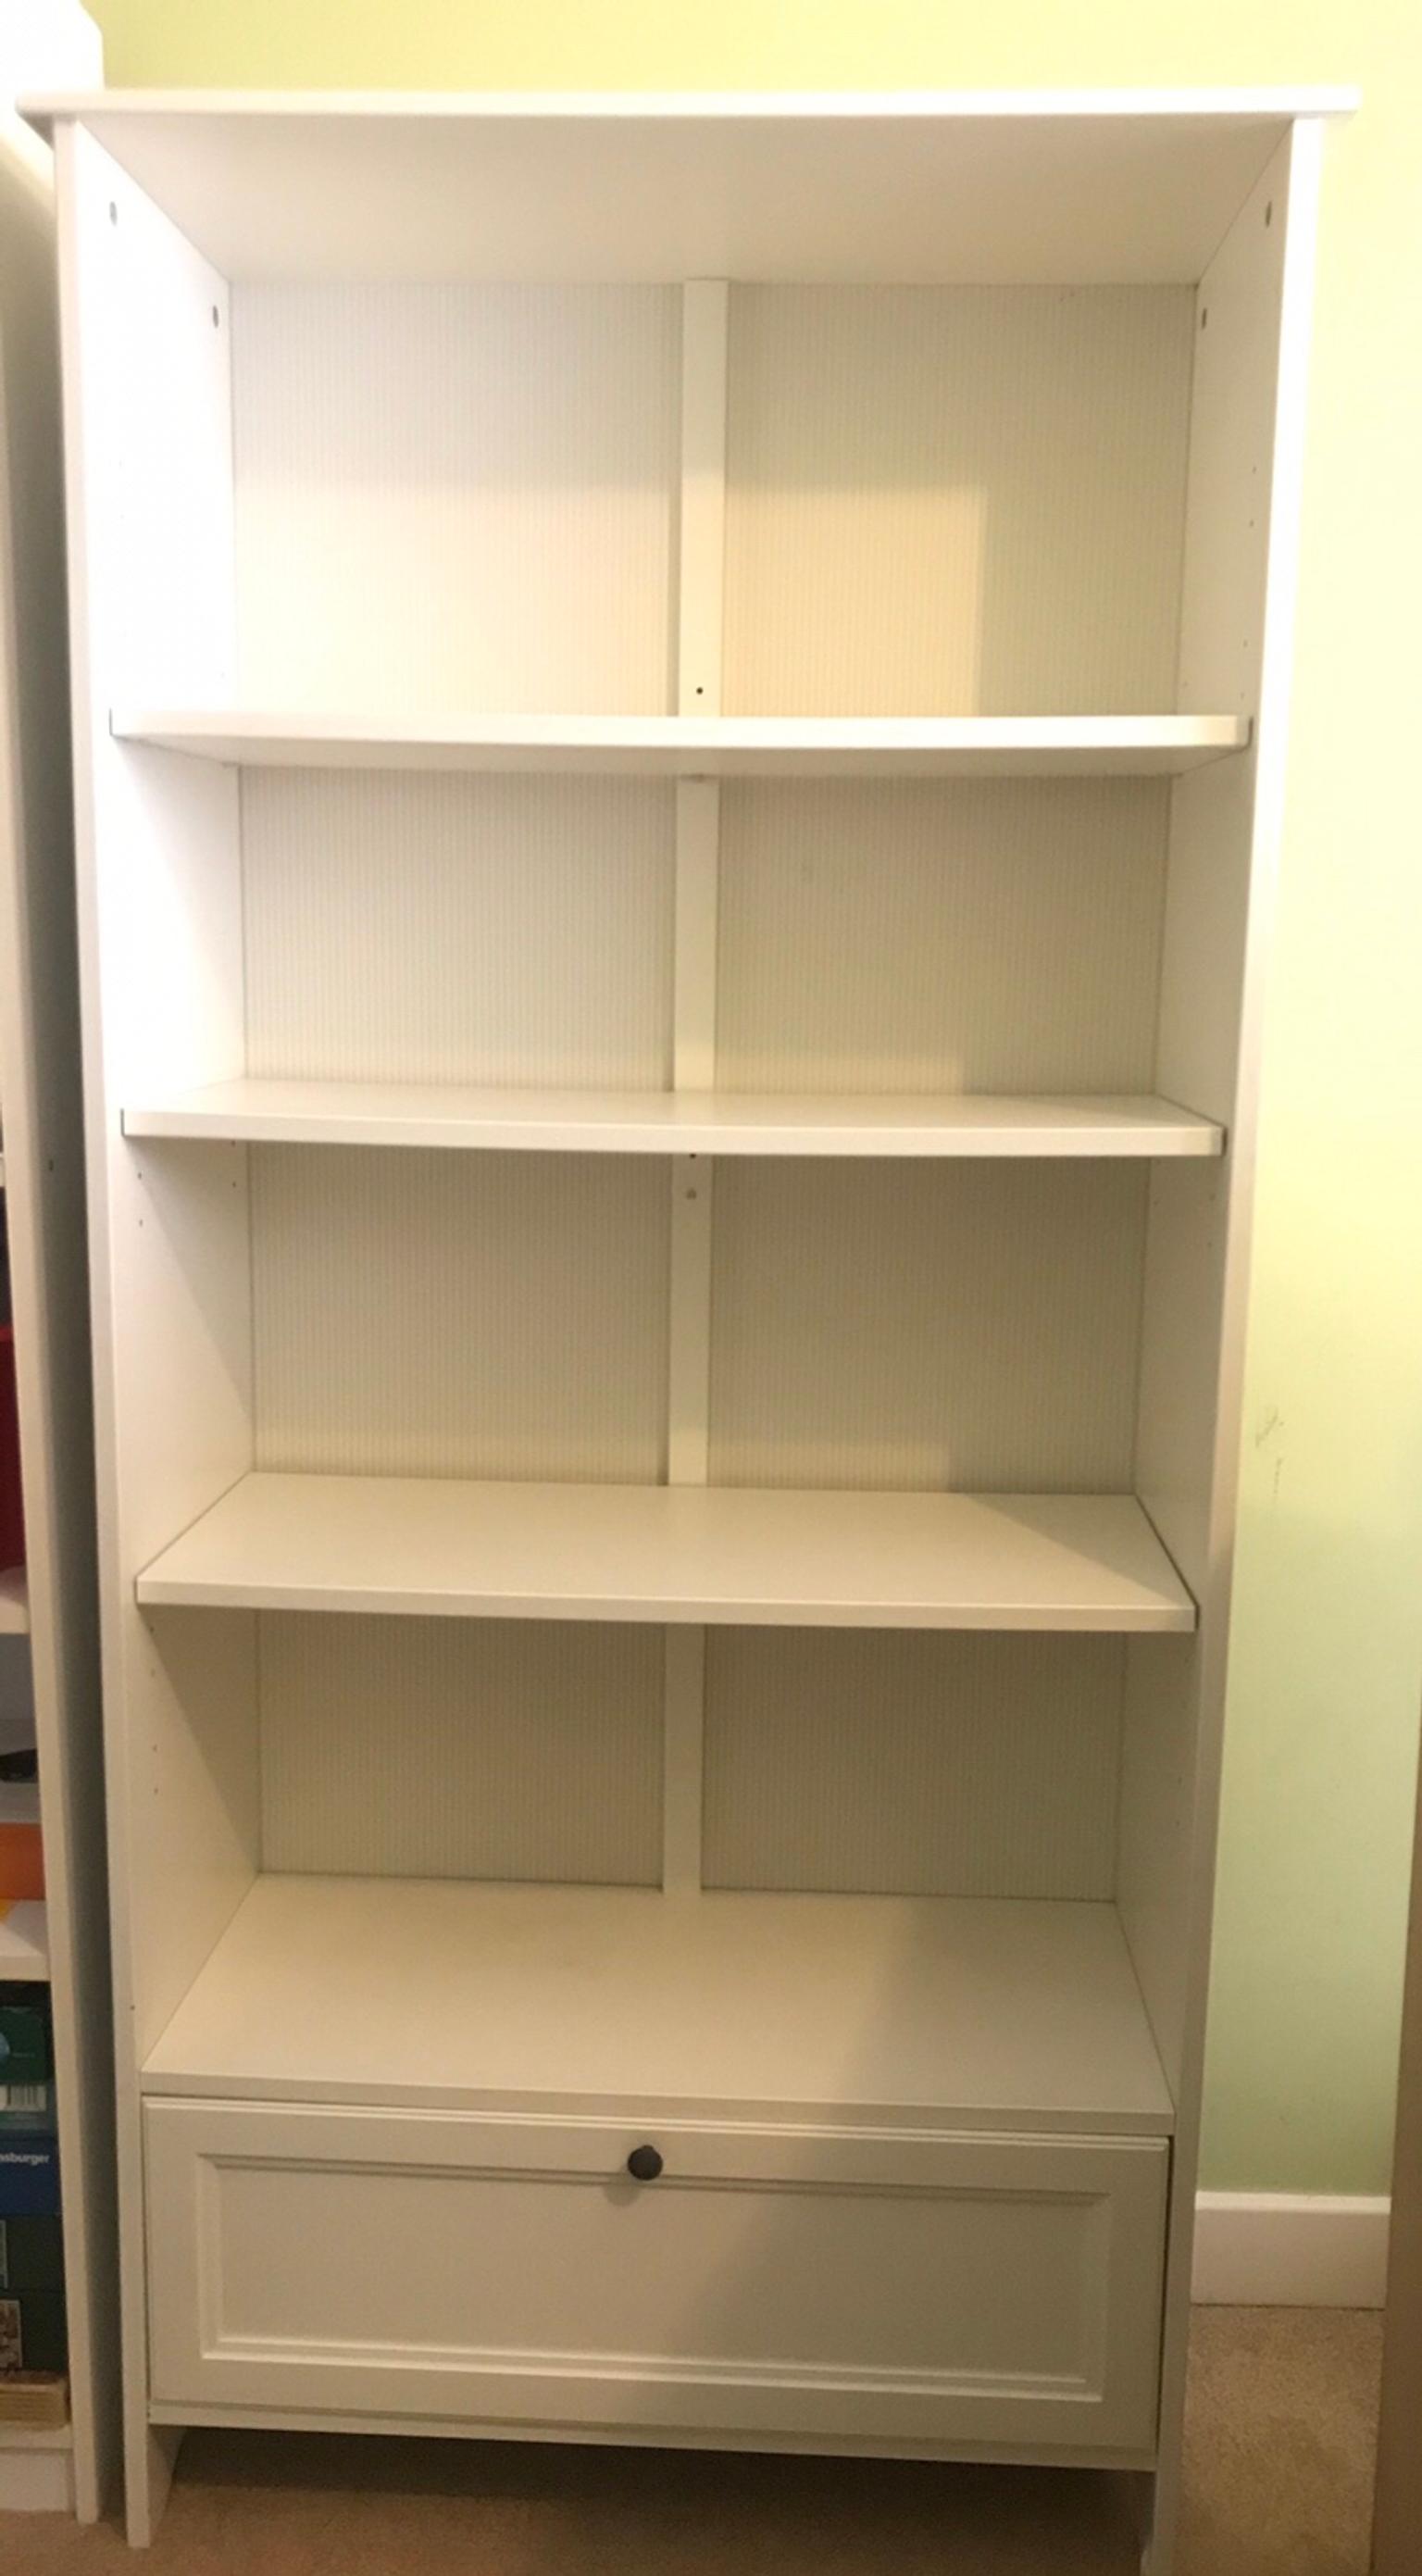 Ikea White Bookcase With Bottom Drawer, Bookcase With Drawer At Bottom